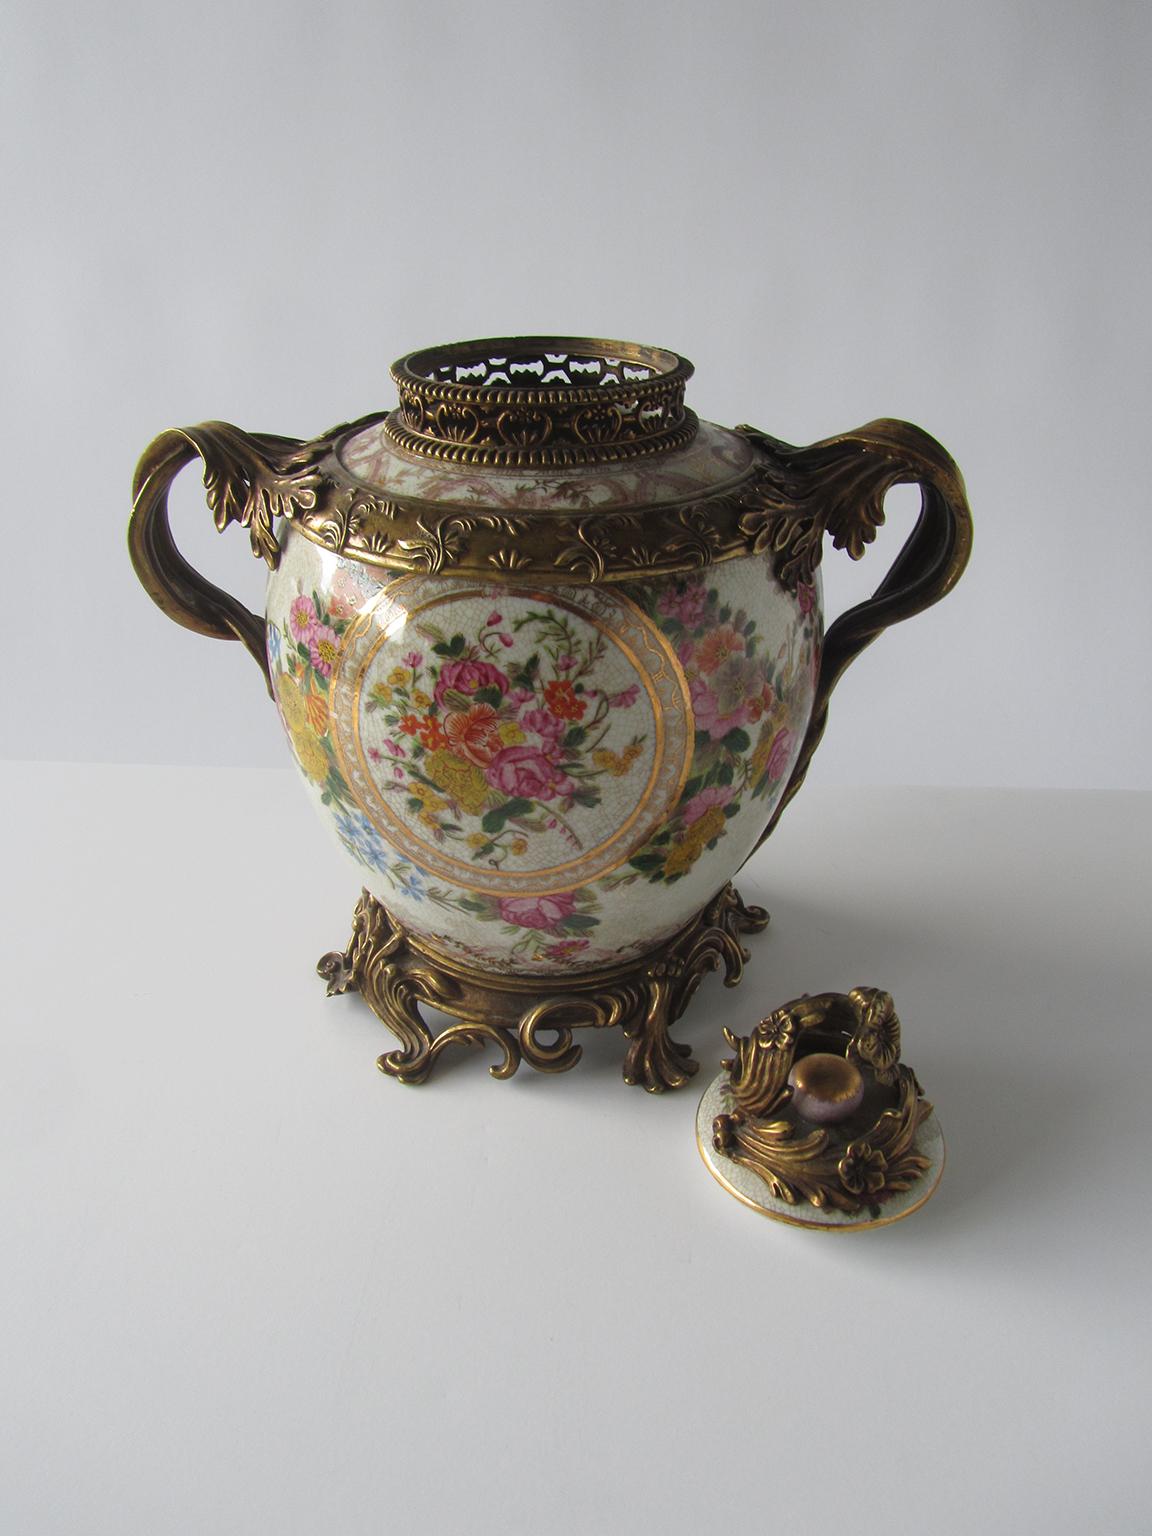 The Chinese porcelain covered urns with floral motif, with bronze dore' mounts.